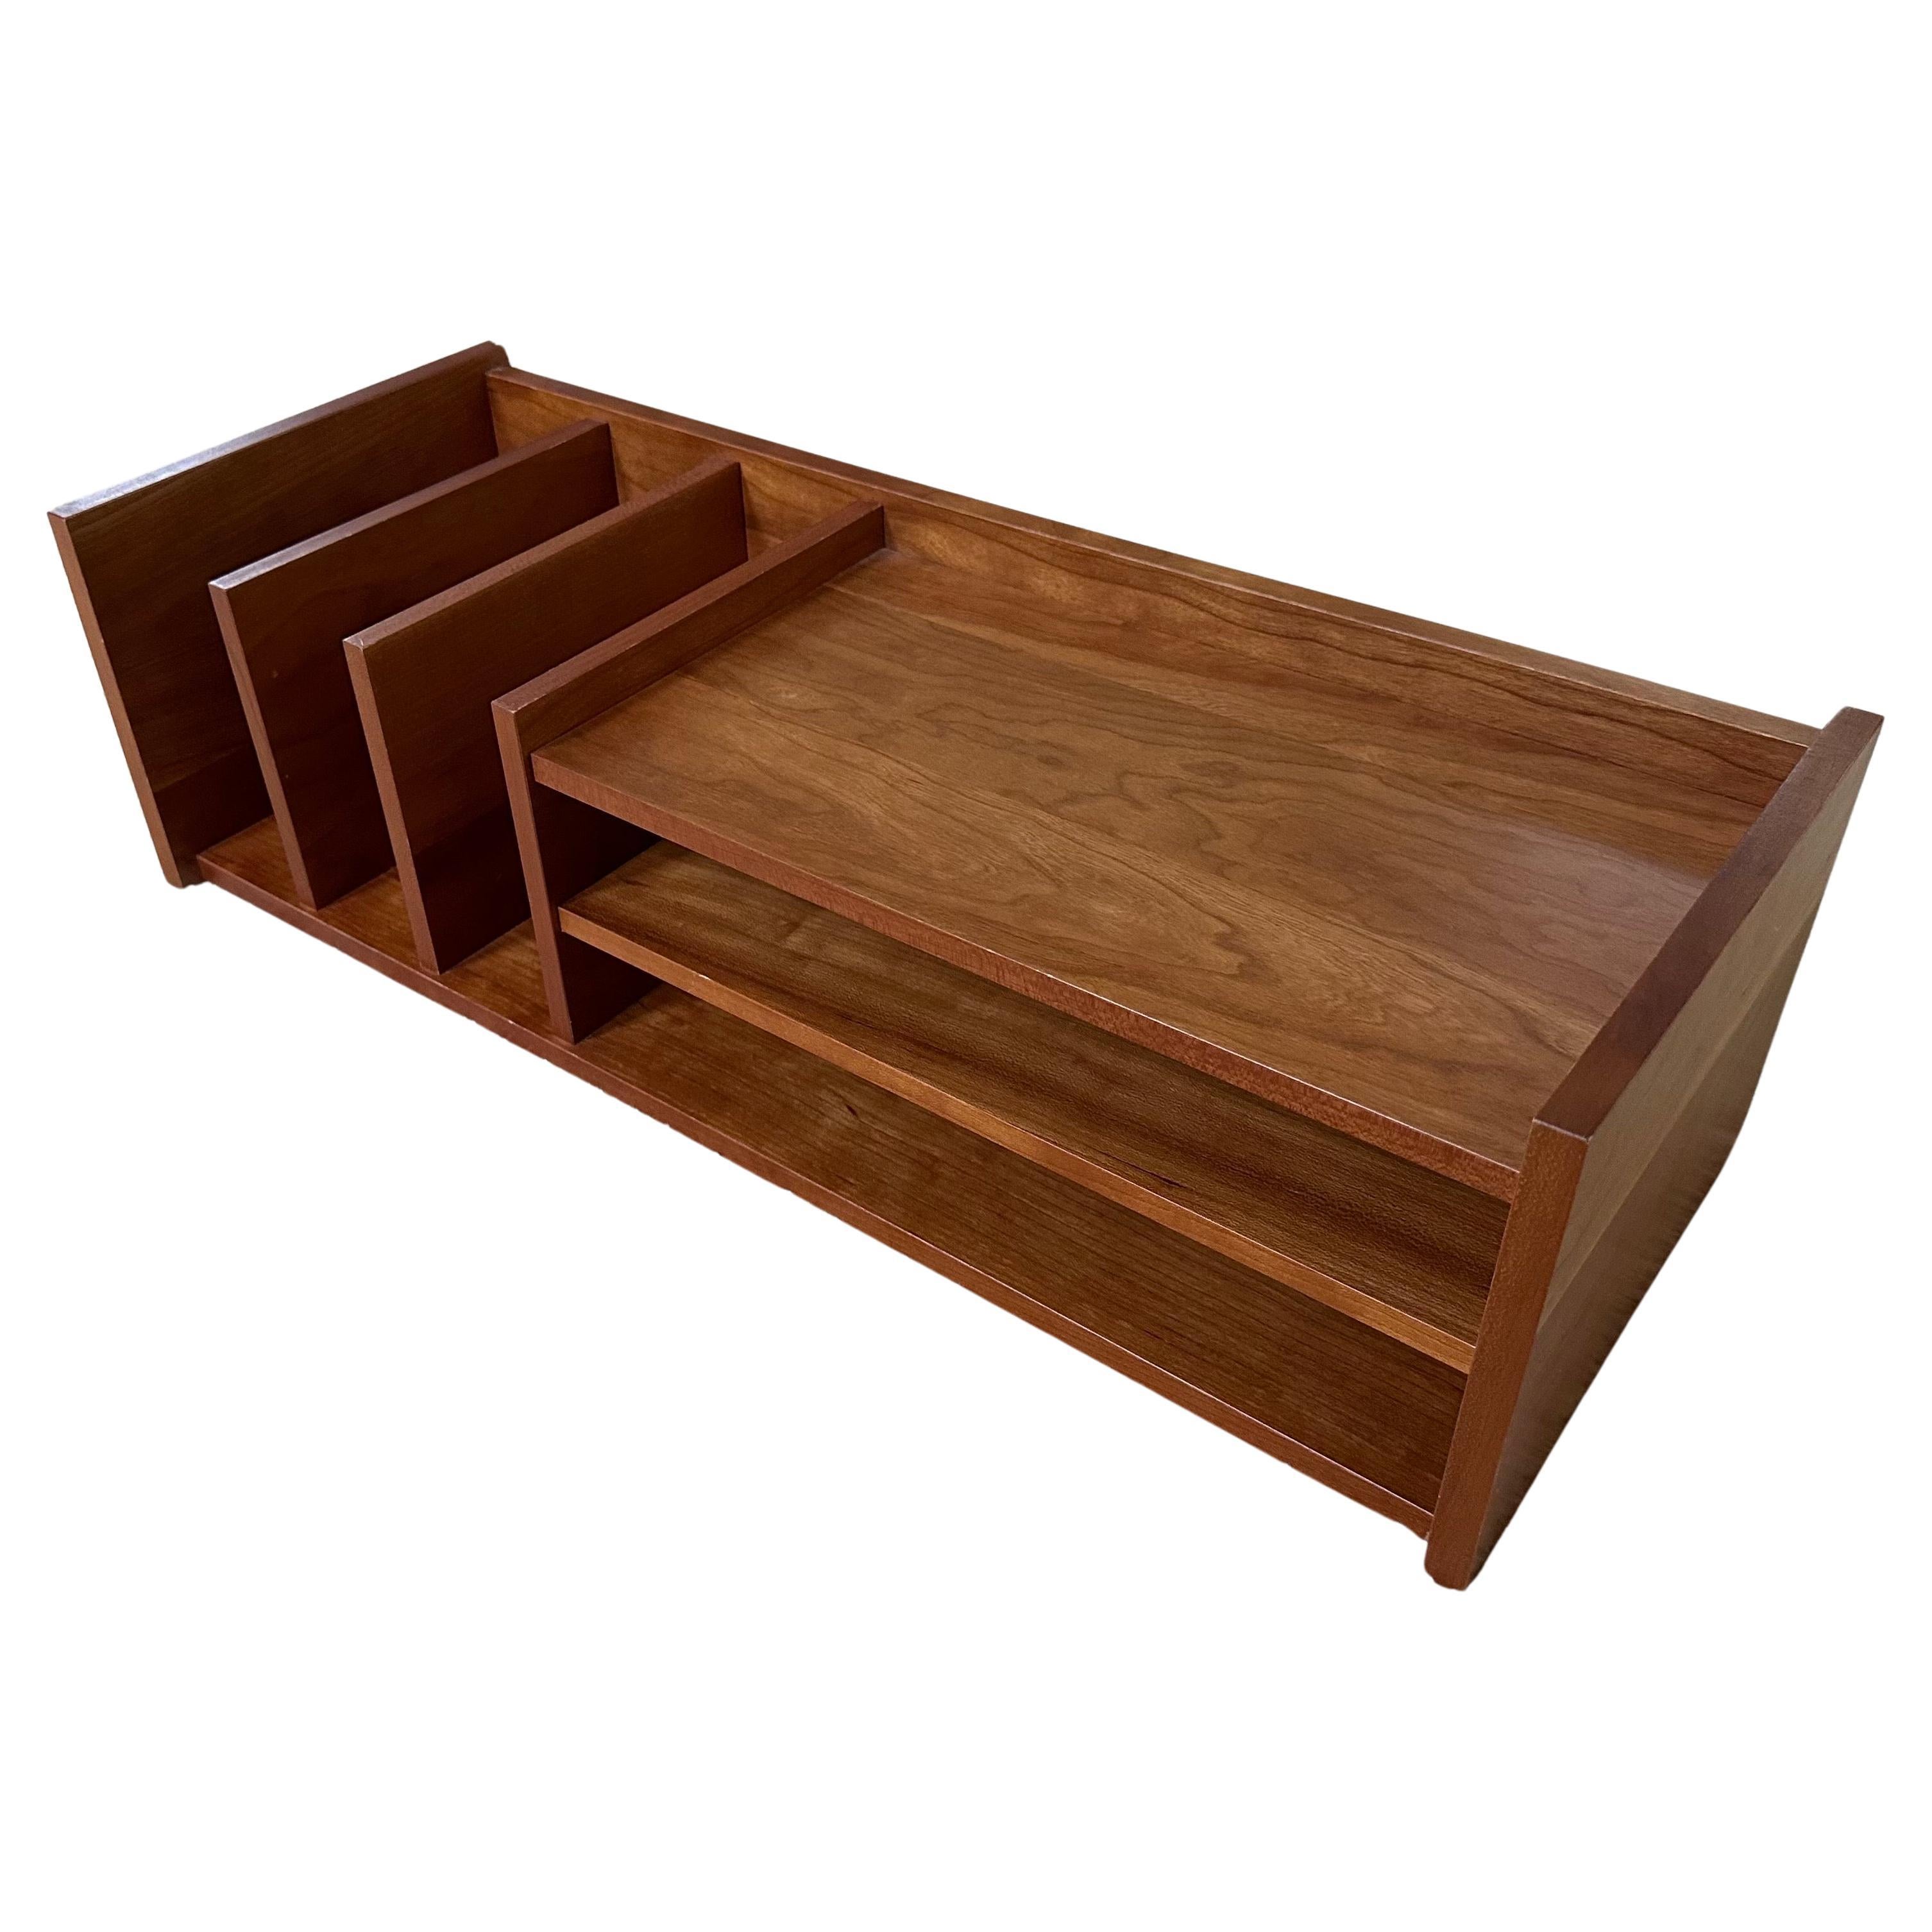 Very functional Danish modern cherry veneer desk organizer / letter tray, circa 1970s. The piece is in excellent condition and measures 24